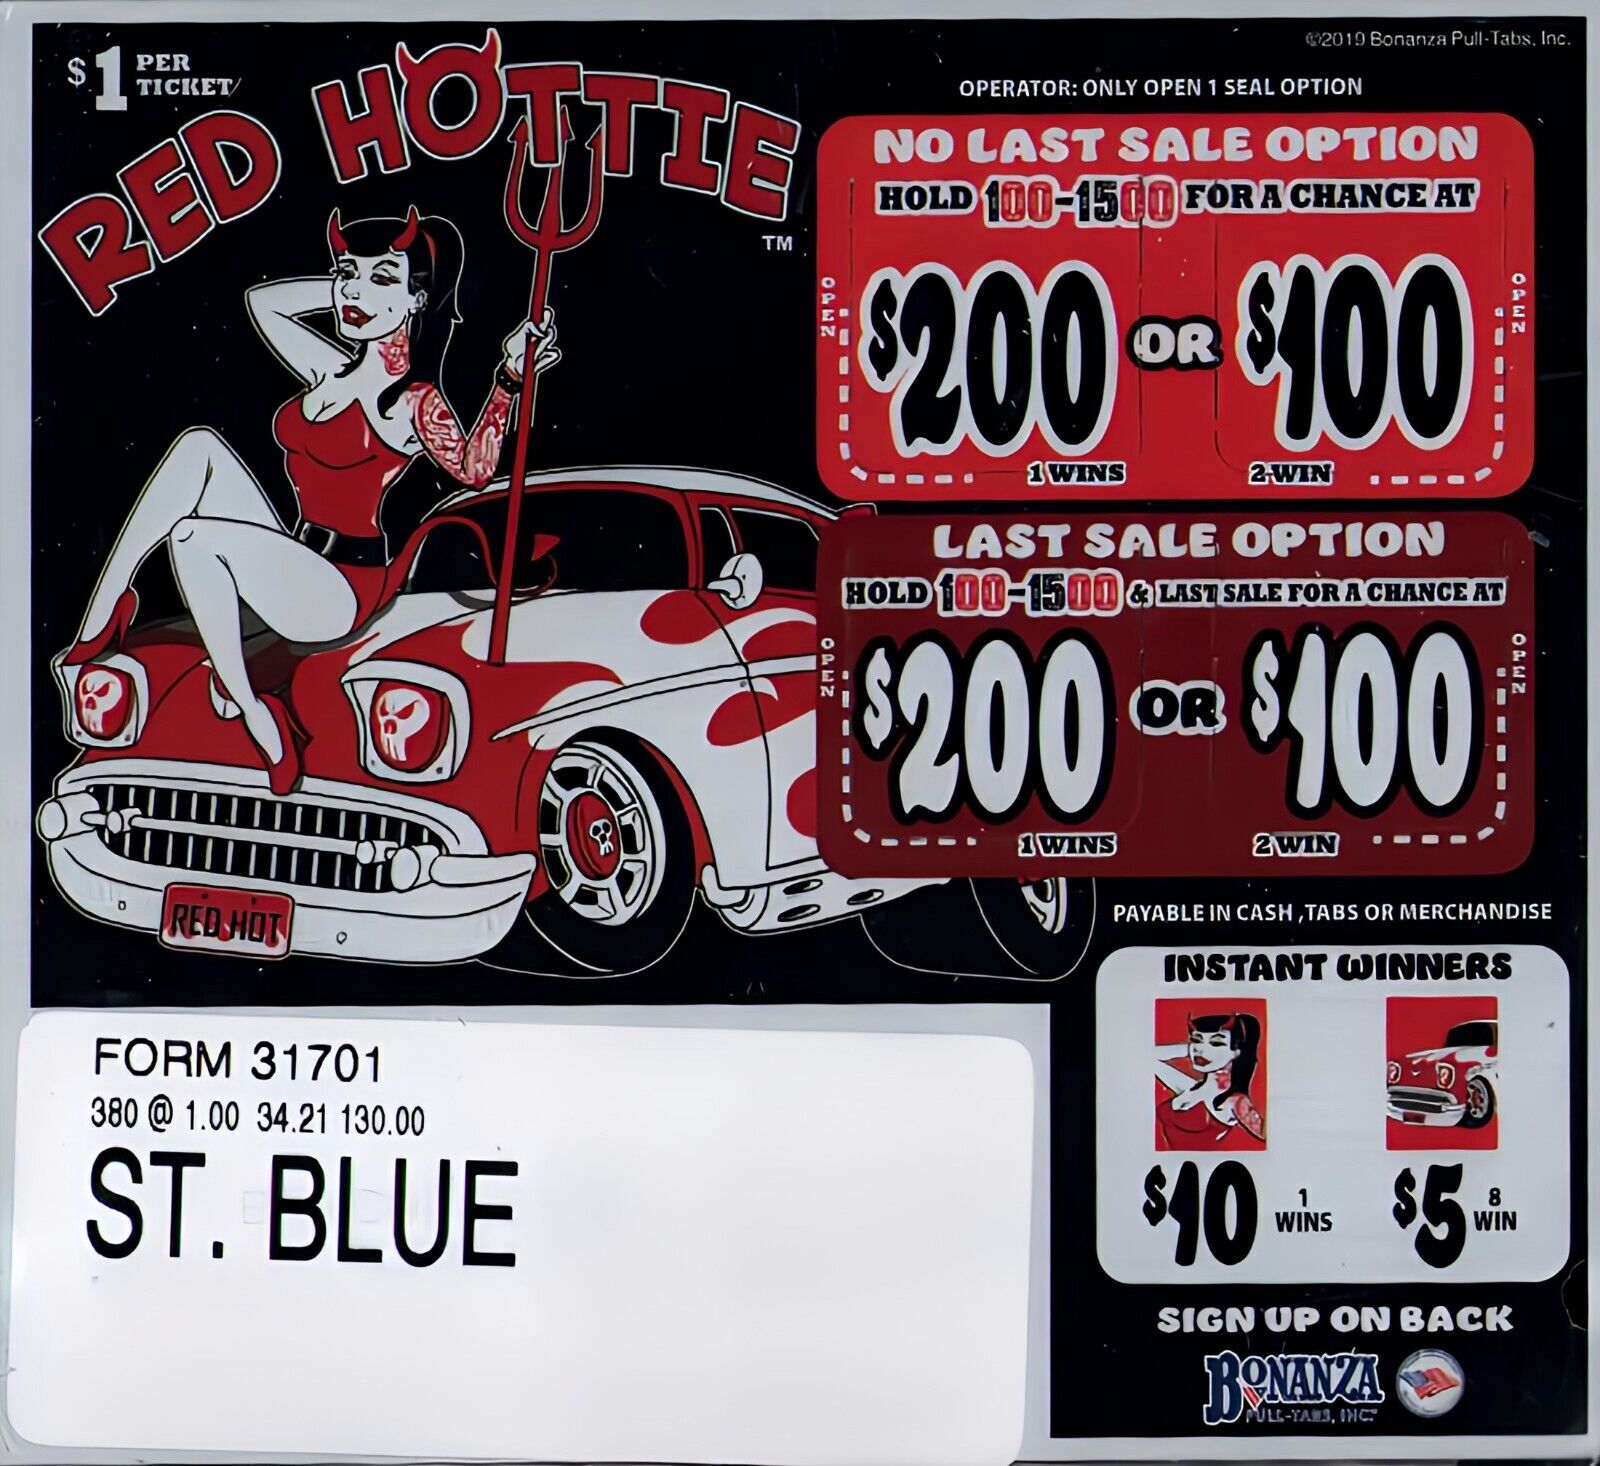 Hard Card Pull Tickets - 3 Pack Red Hottie